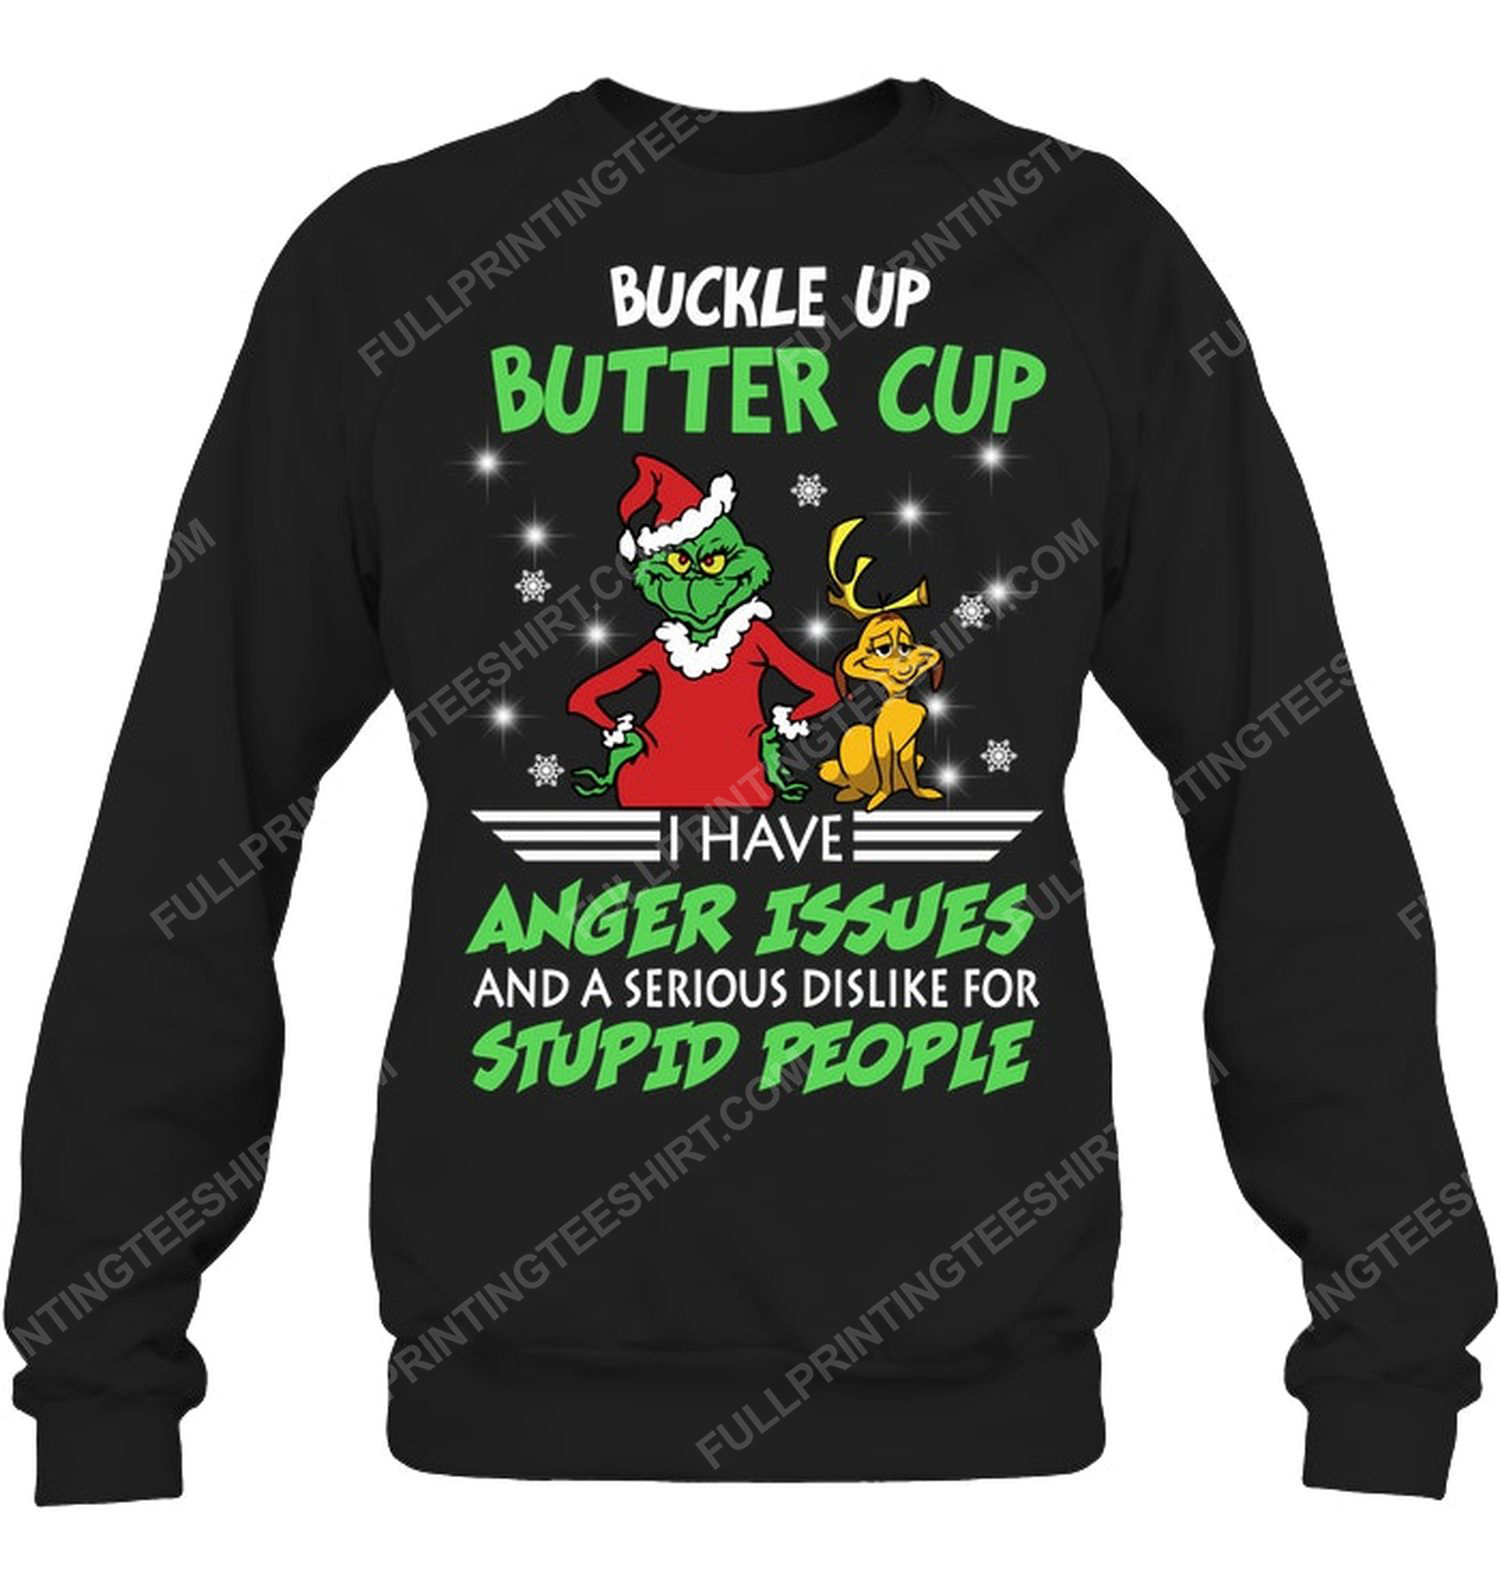 The grinch buckle the grinch up buttercup i have anger issues and a serious dislike for stupid people sweatshirt